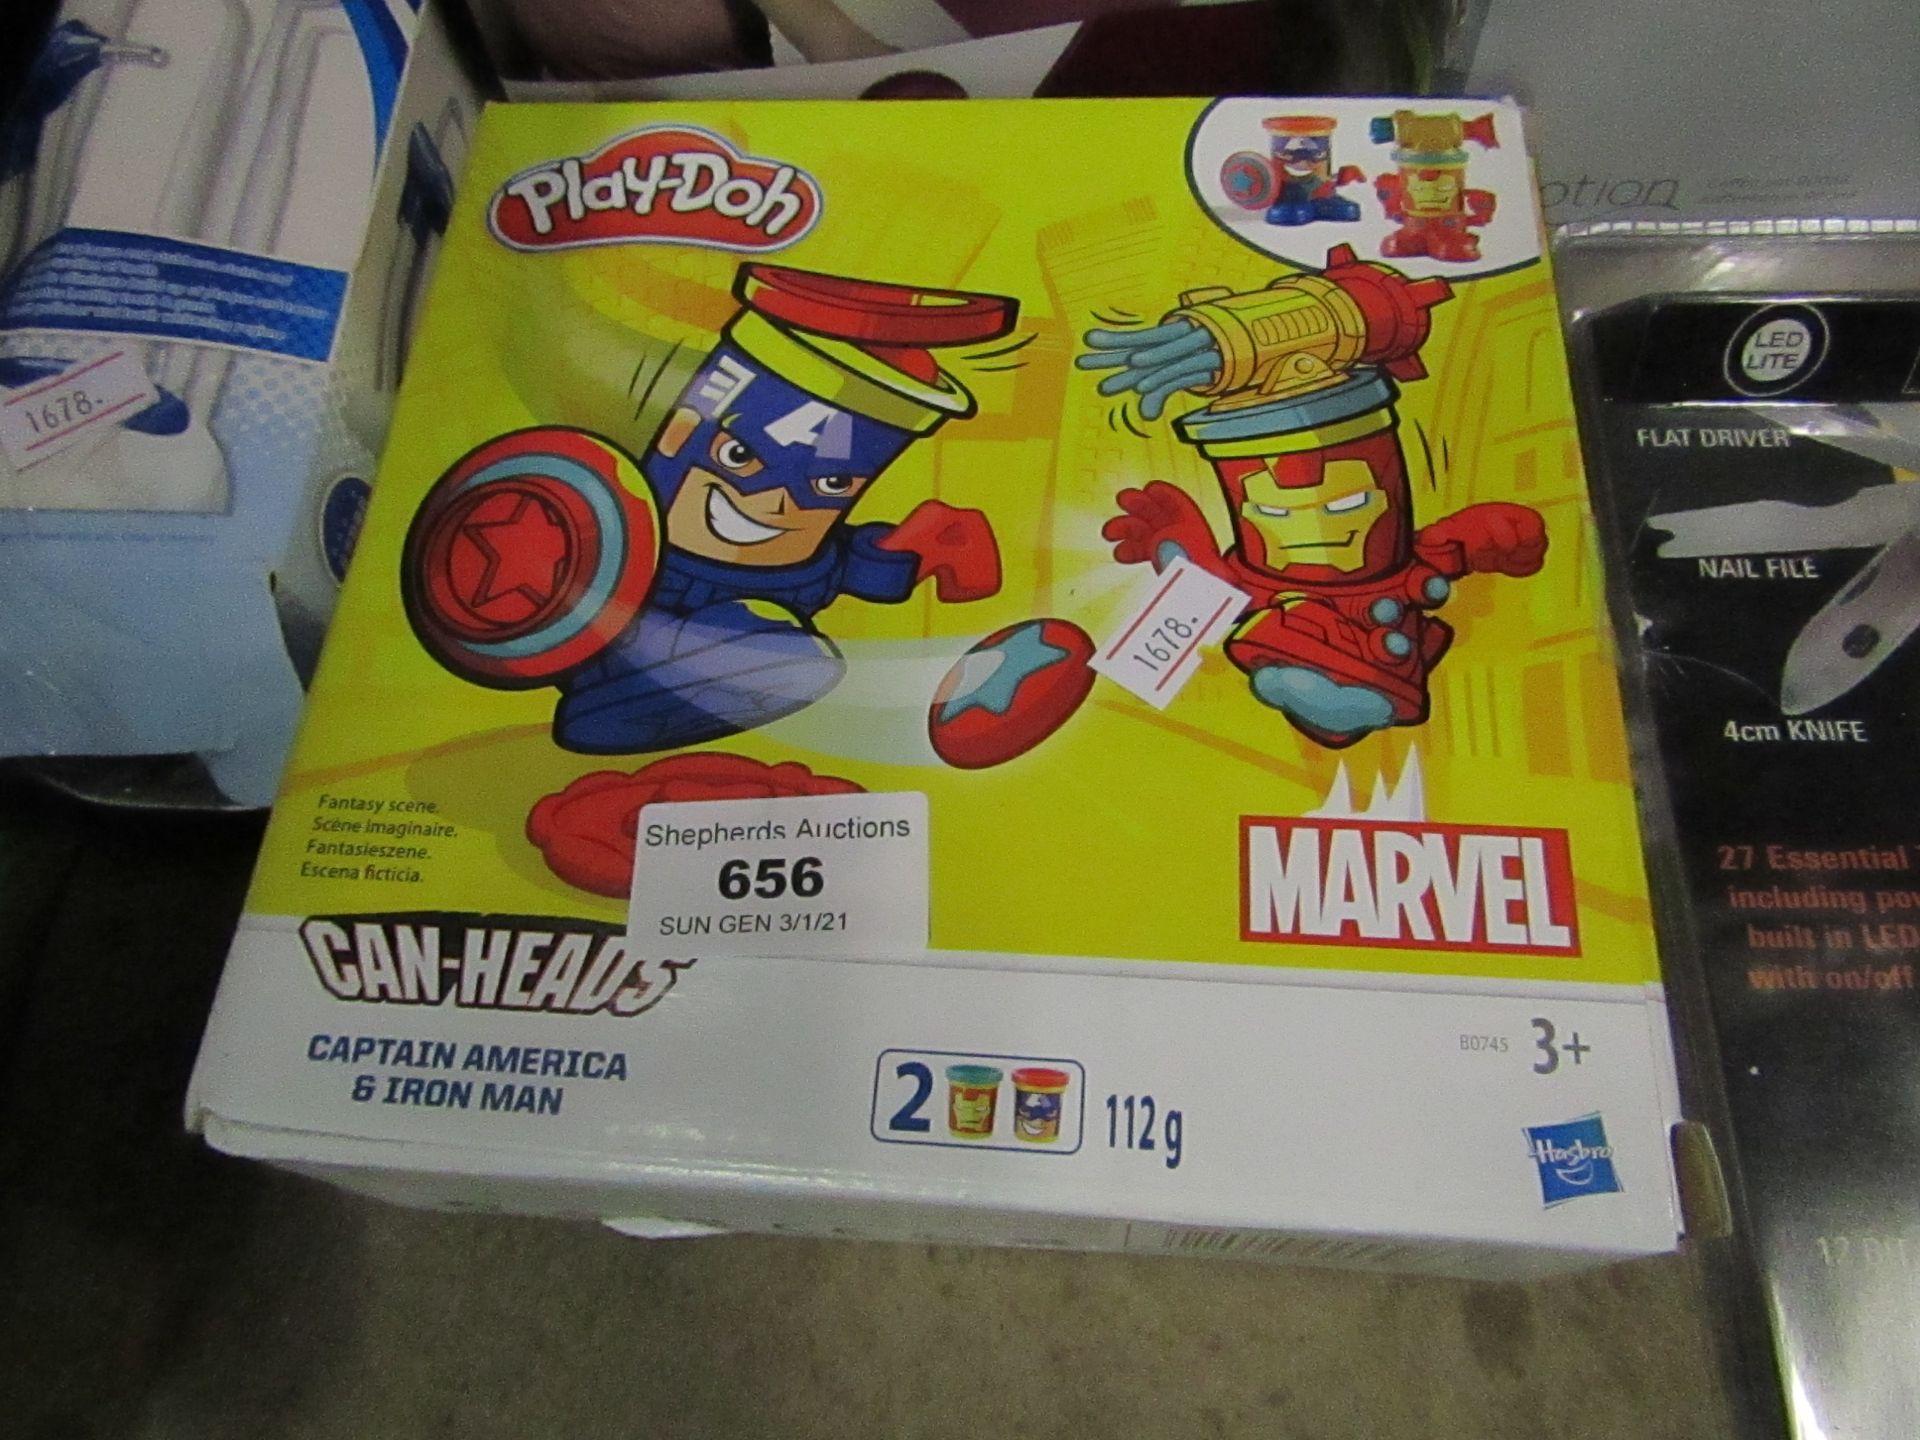 Marvel Play doh can heads, unchecked and boxed